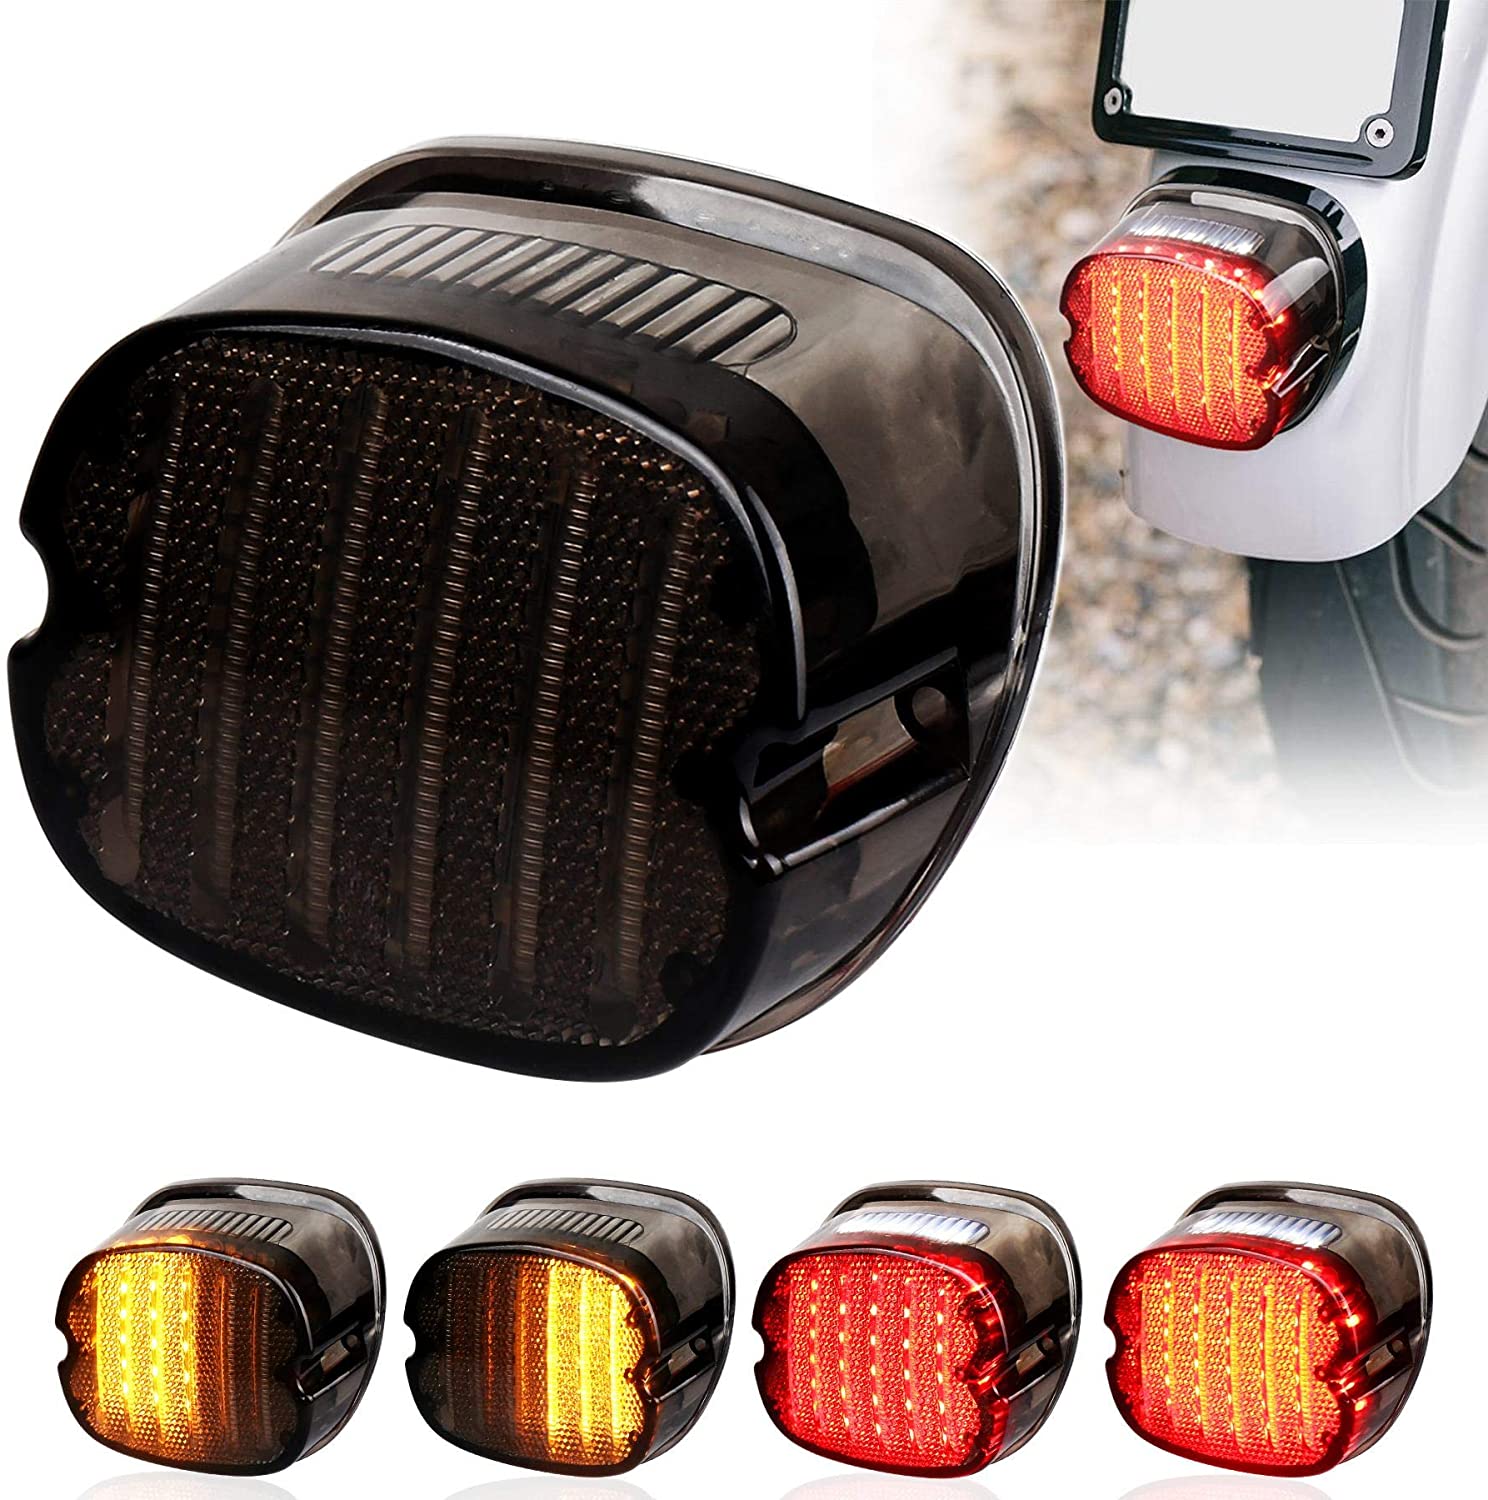 NTHREEAUTO LED Turn Signals Brake Light with Smoked Lens Cover for Harley Sportster Street Glide Road King Softail Driving Lights Front & Rear